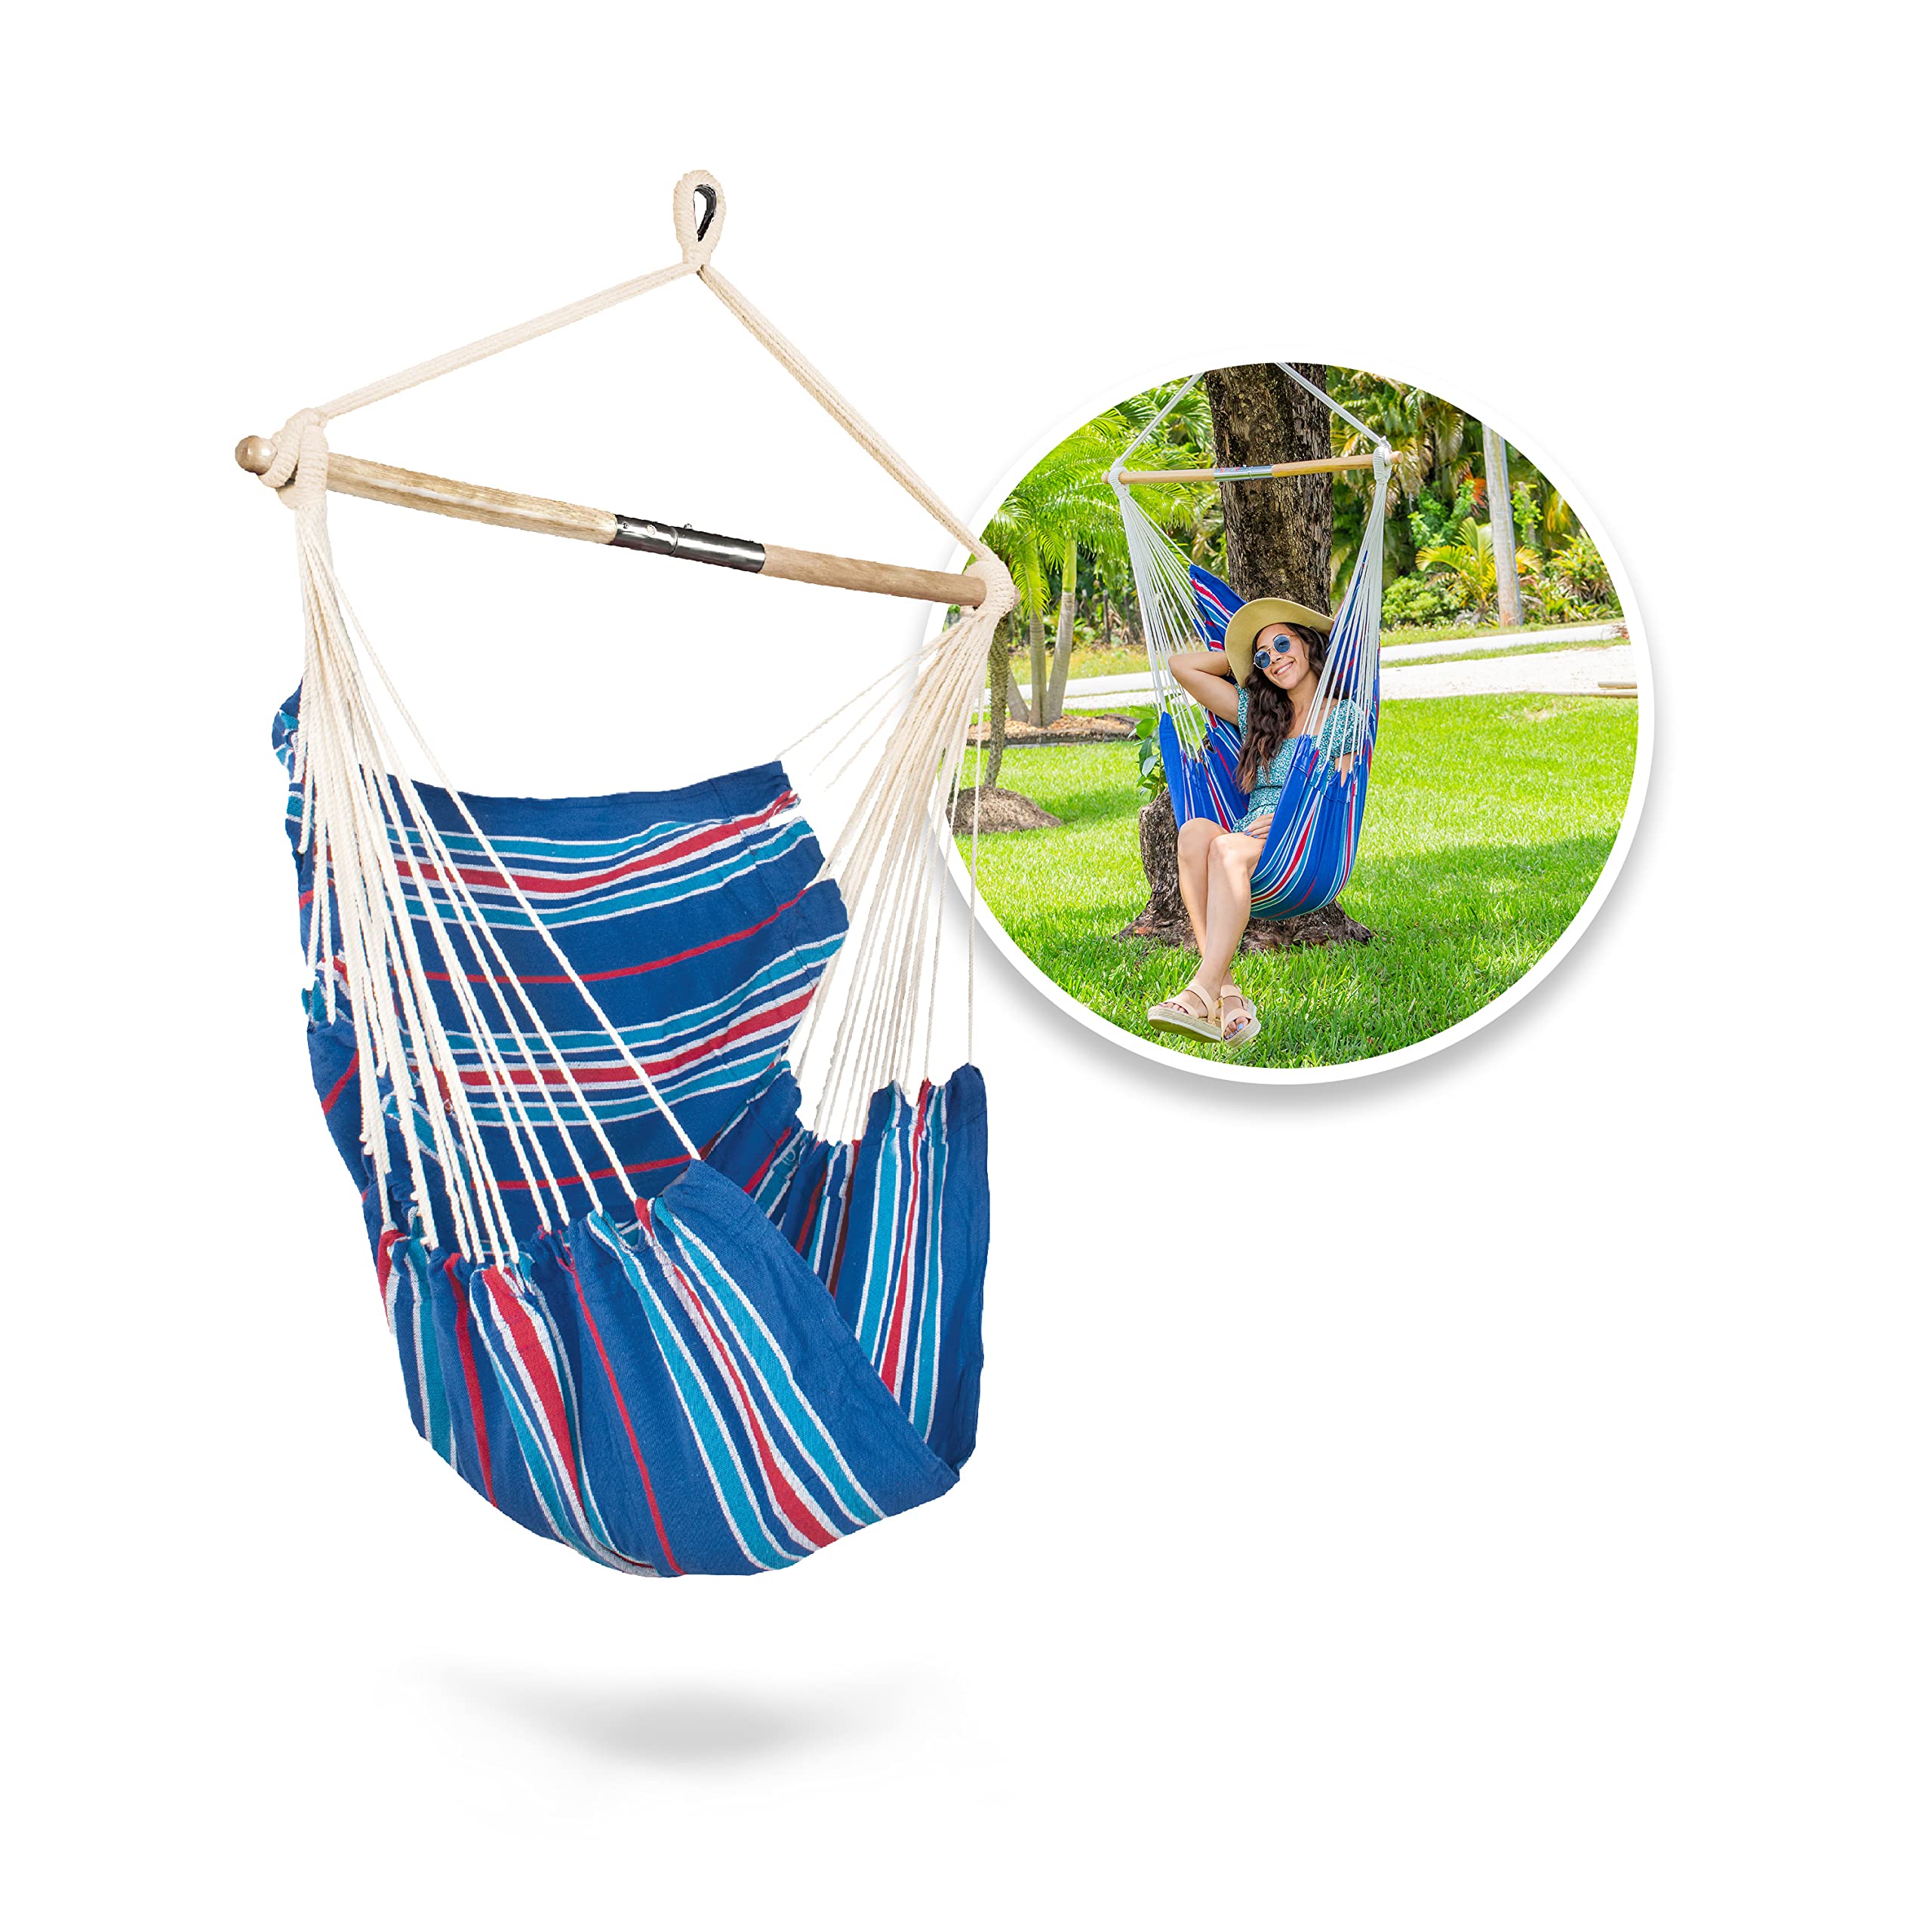 Bliss Hammocks Indoor/Outdoor Collapsible Hammock Chair w/ Bag (Patriotic Stripe) $10.46, More + Free Shipping w/ Prime or on $25+